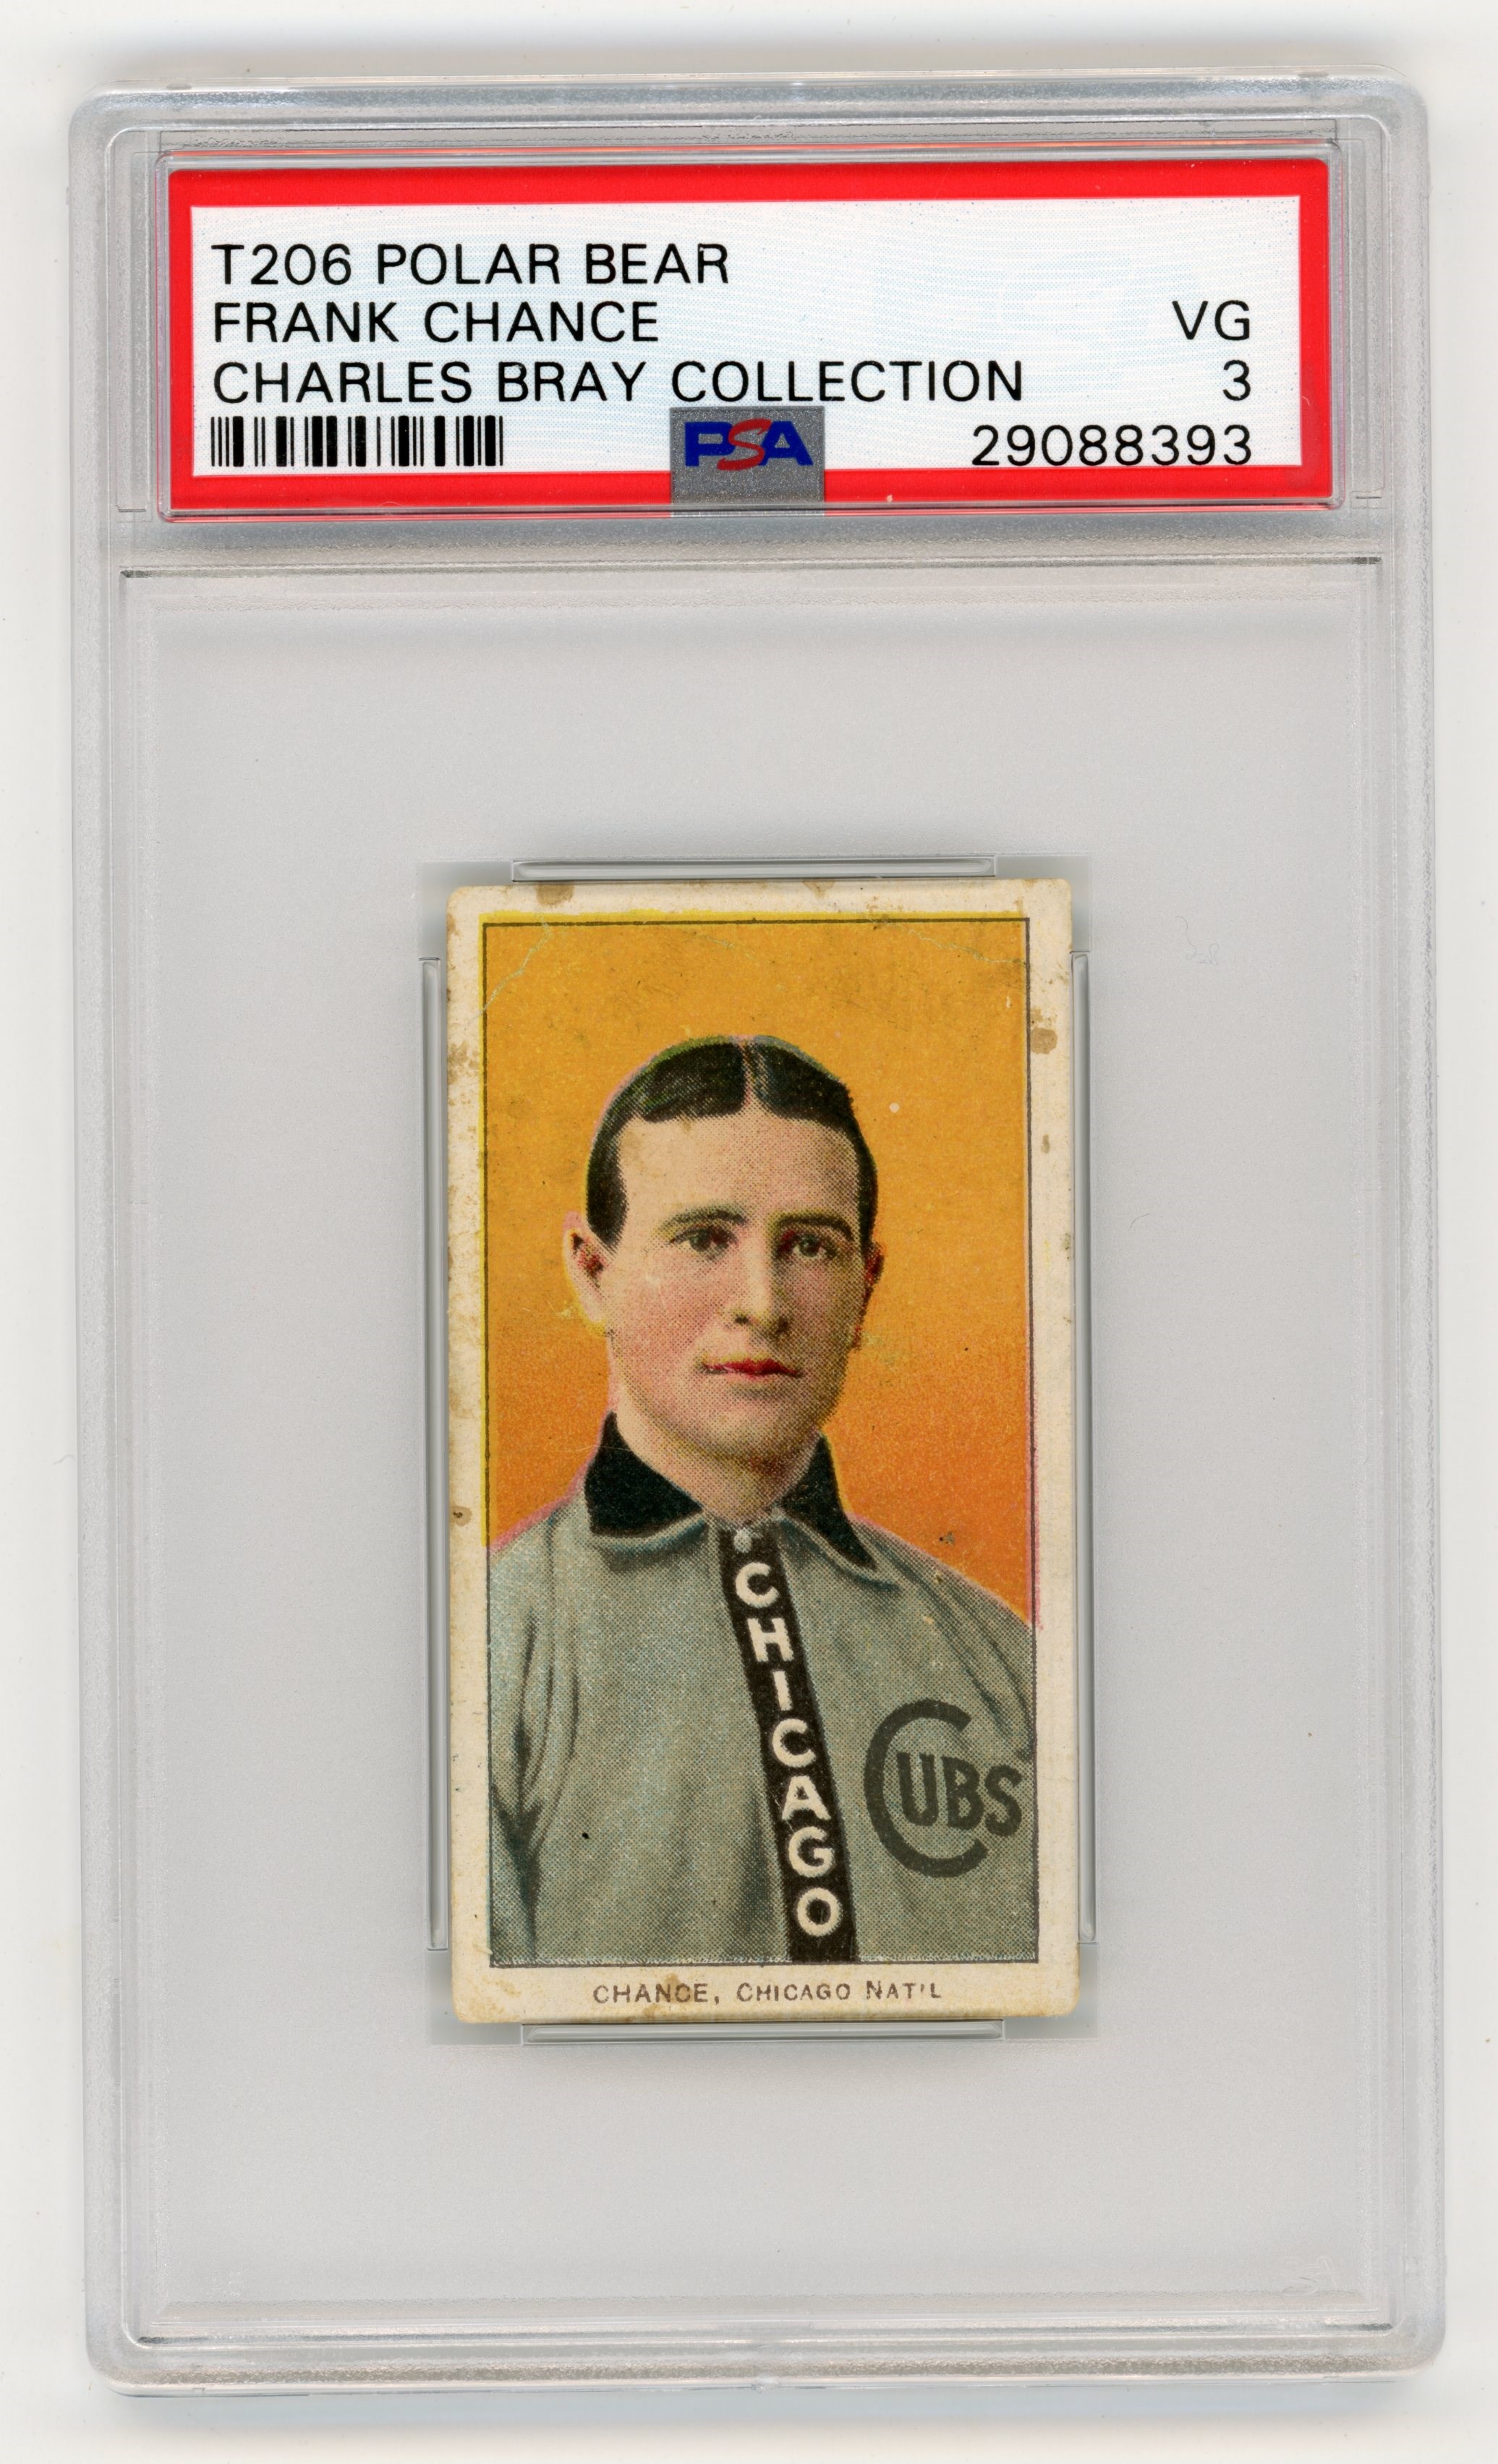 T206 Polar Bear Frank Chance PSA 3 From Charles Bray Collection